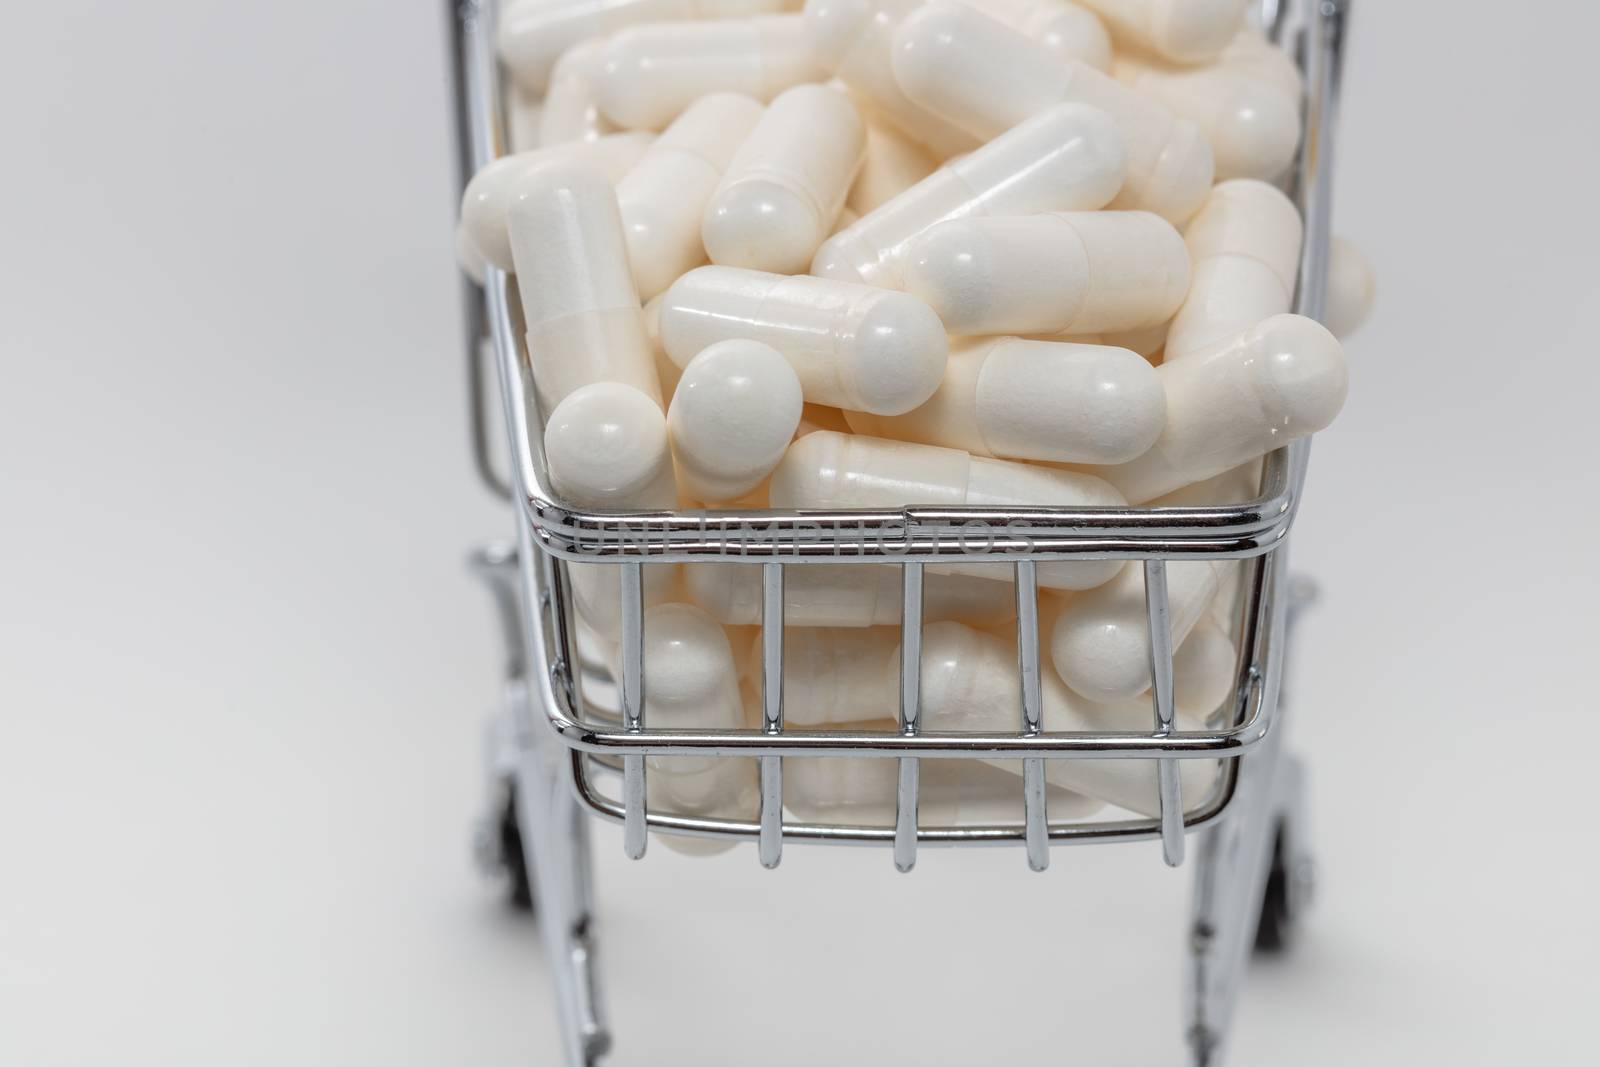 High angle shot of a small shopping cart full of white pills. White background. Close up shot. Shopping online, buying medicine, pharmaceutical business concepts.